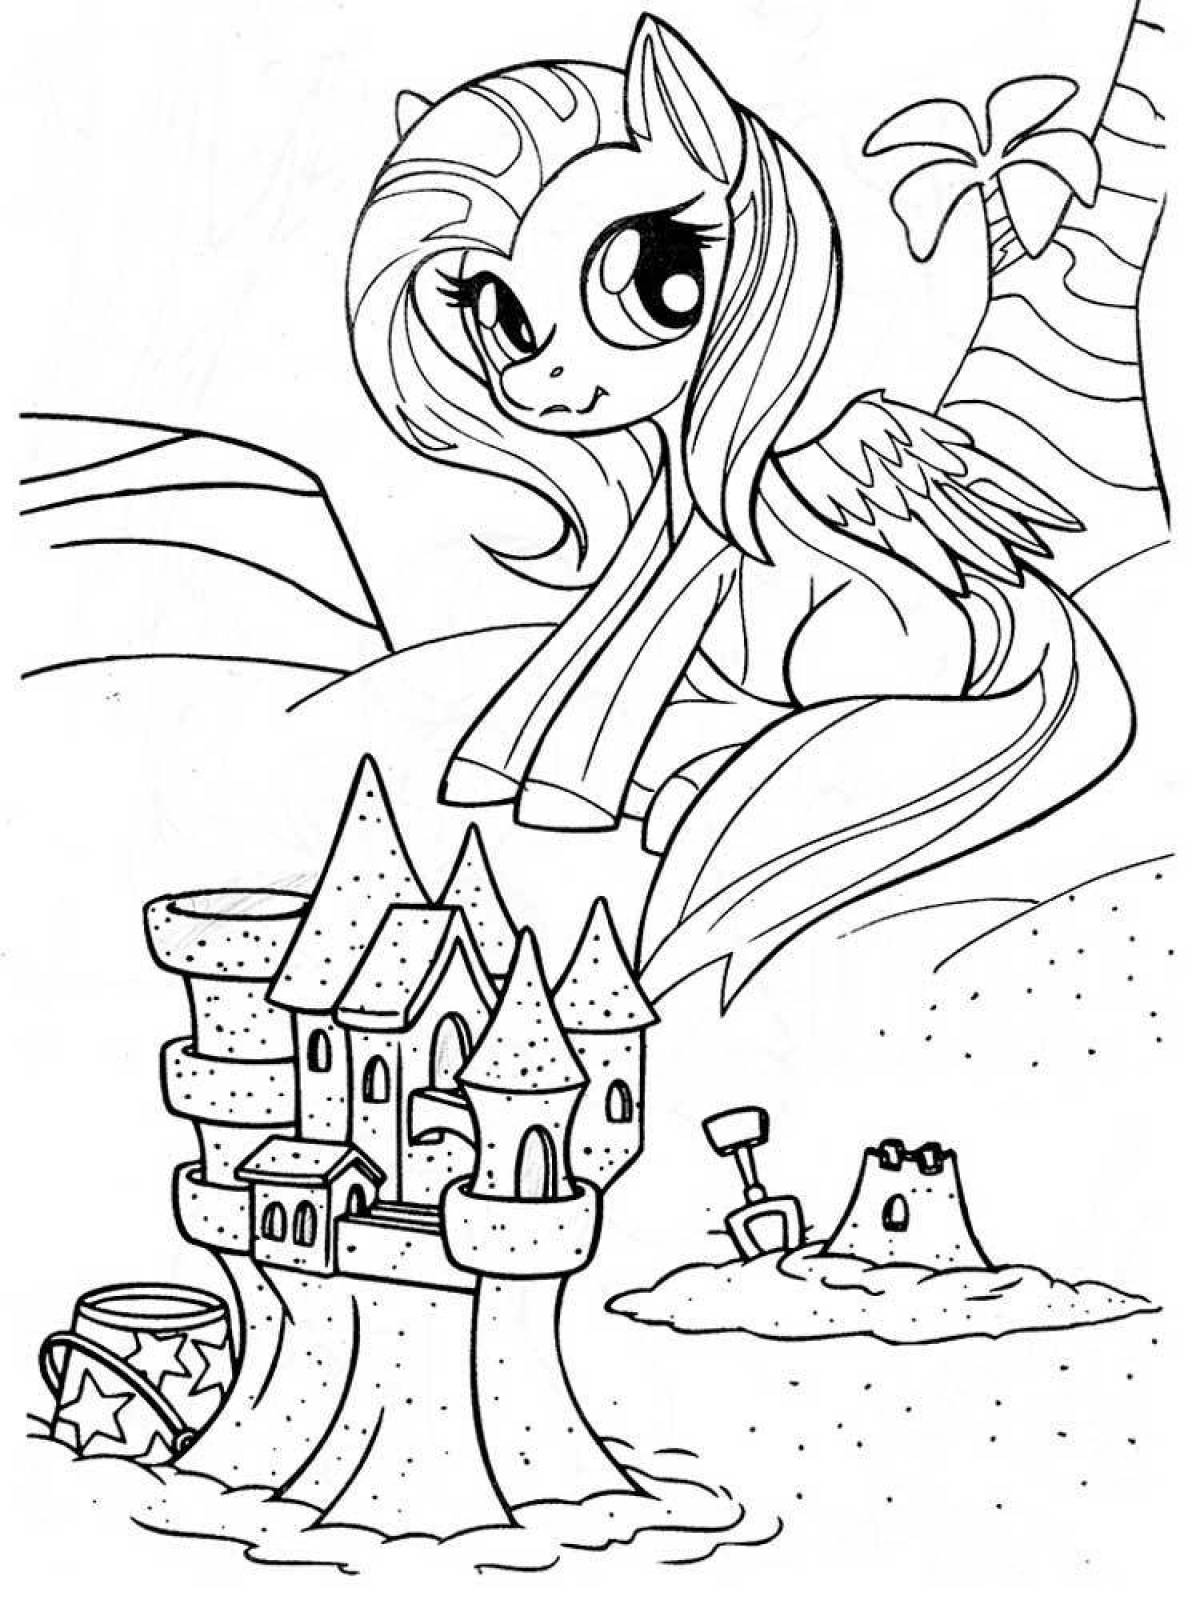 Glorious pony life coloring page